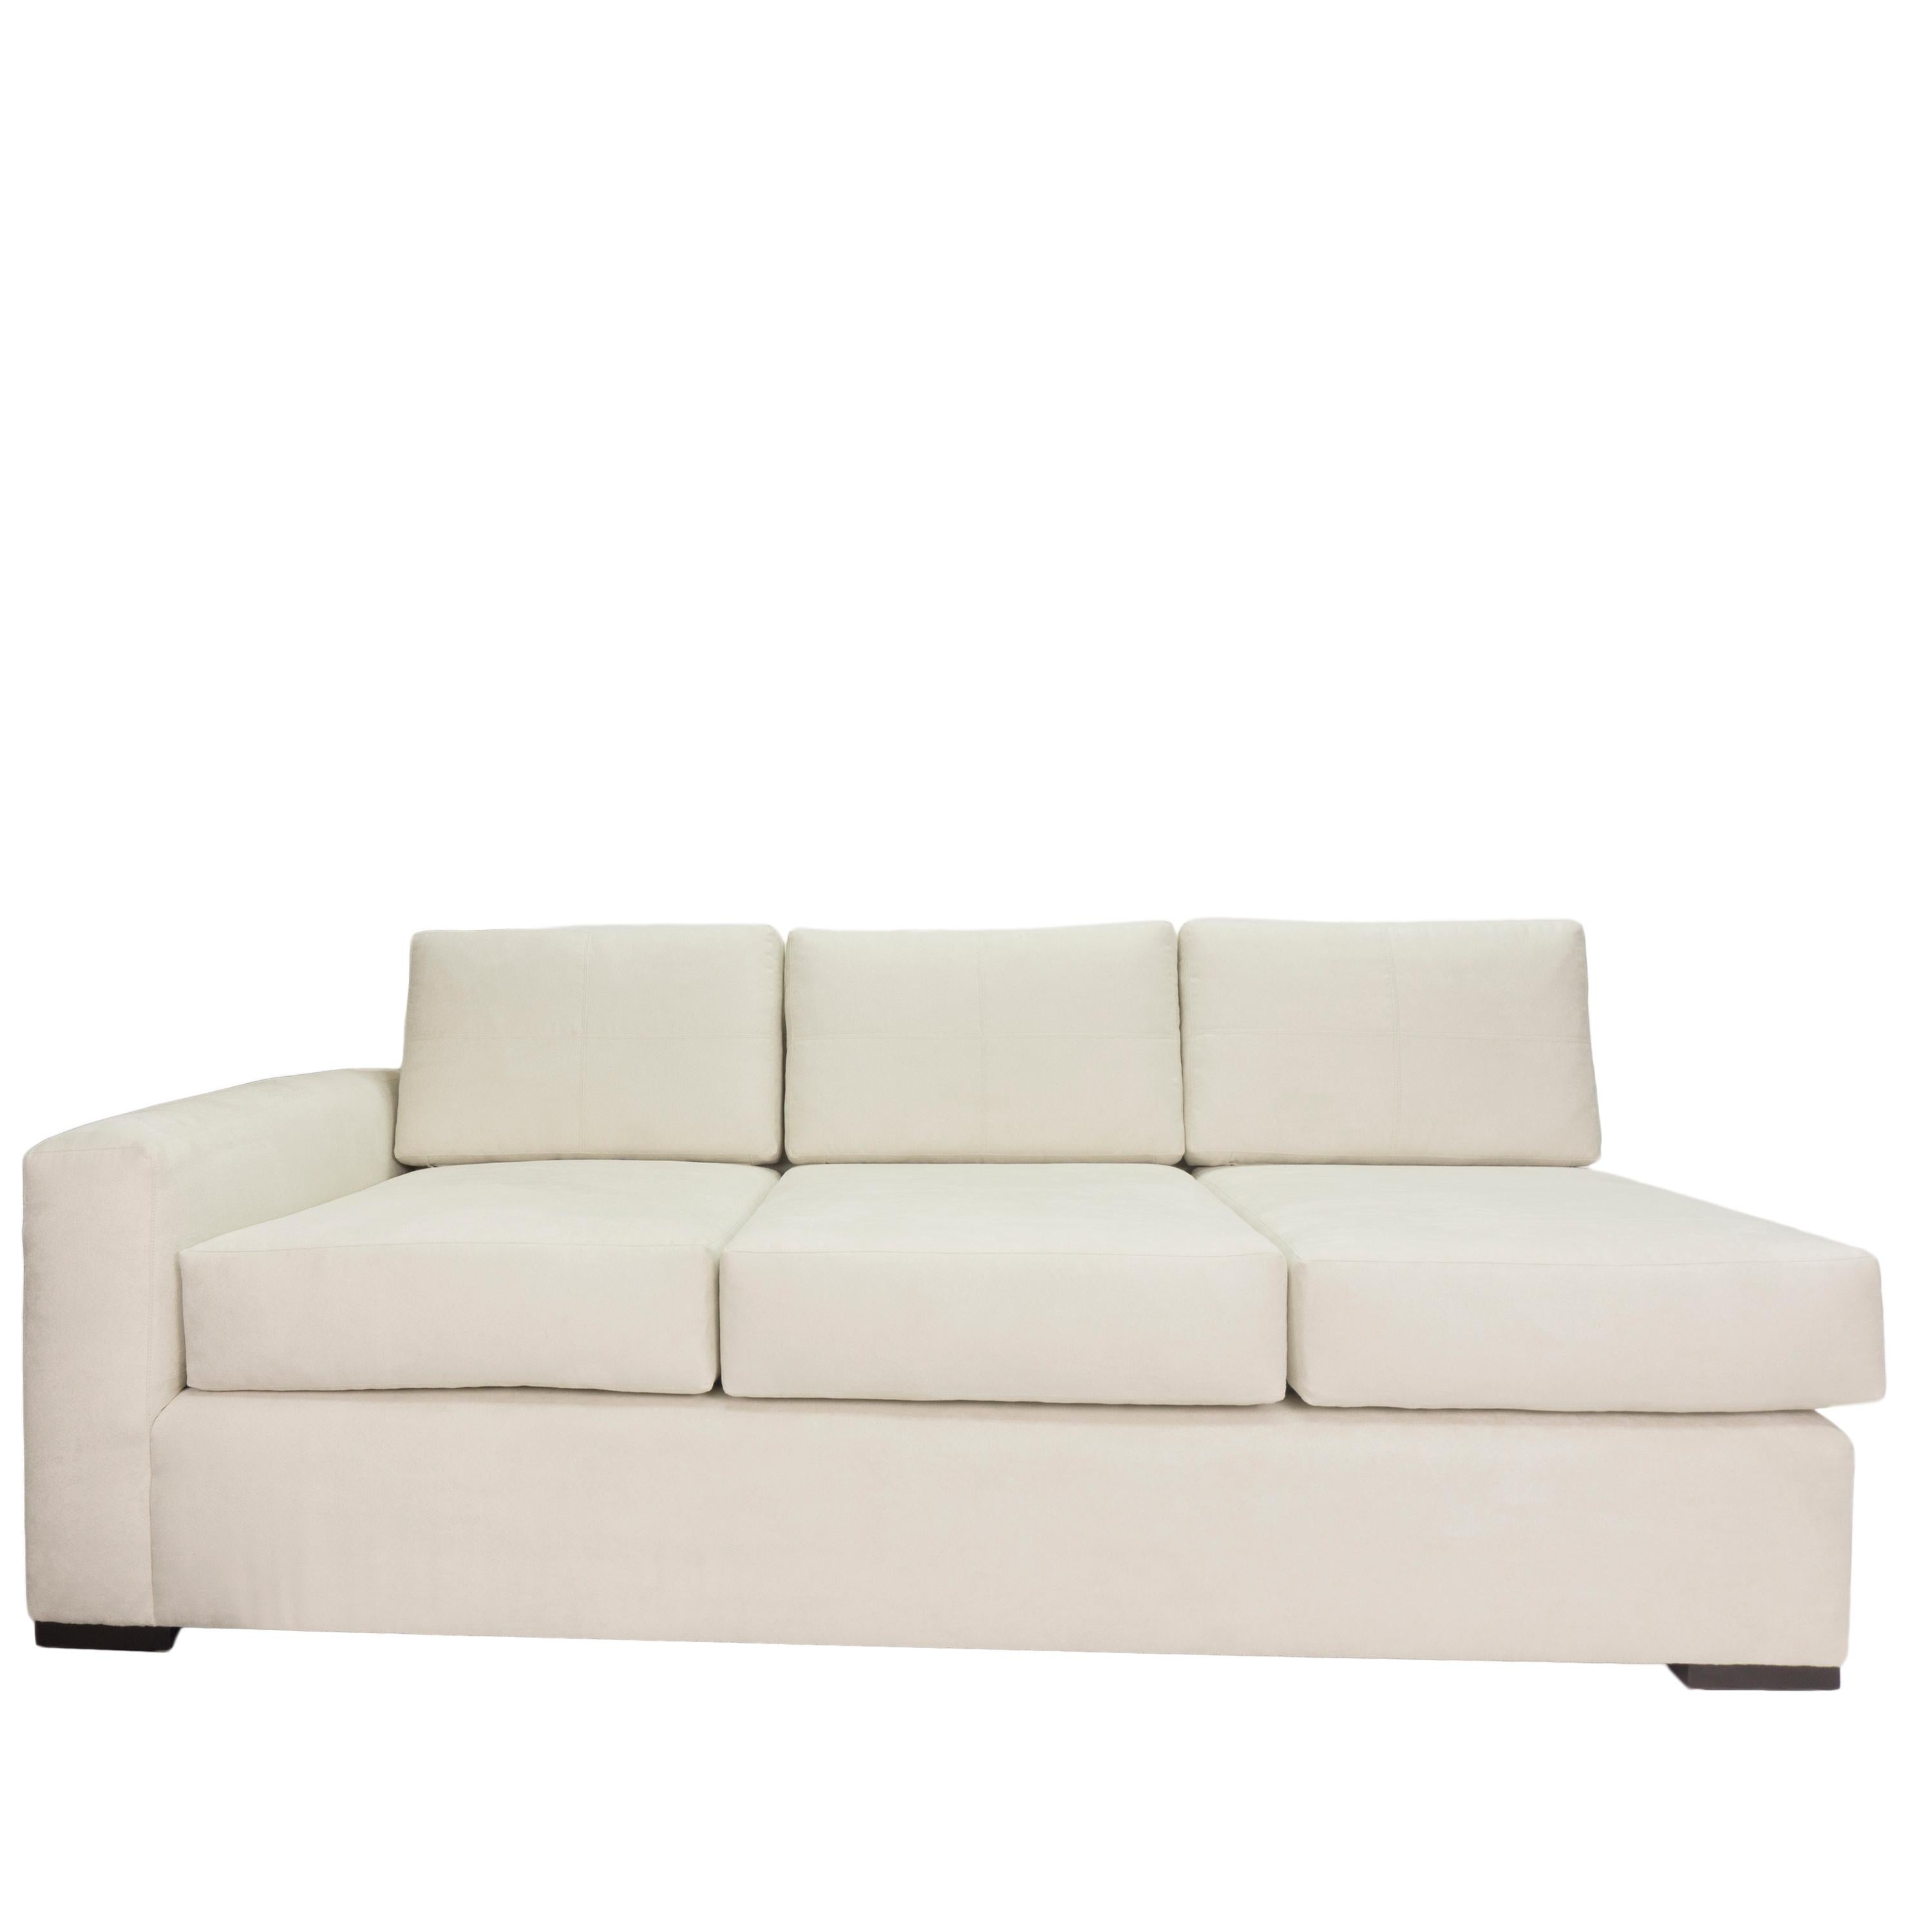 Square Arm Loose Cushion Sectional Sofa, Customizable In New Condition For Sale In Greenwich, CT